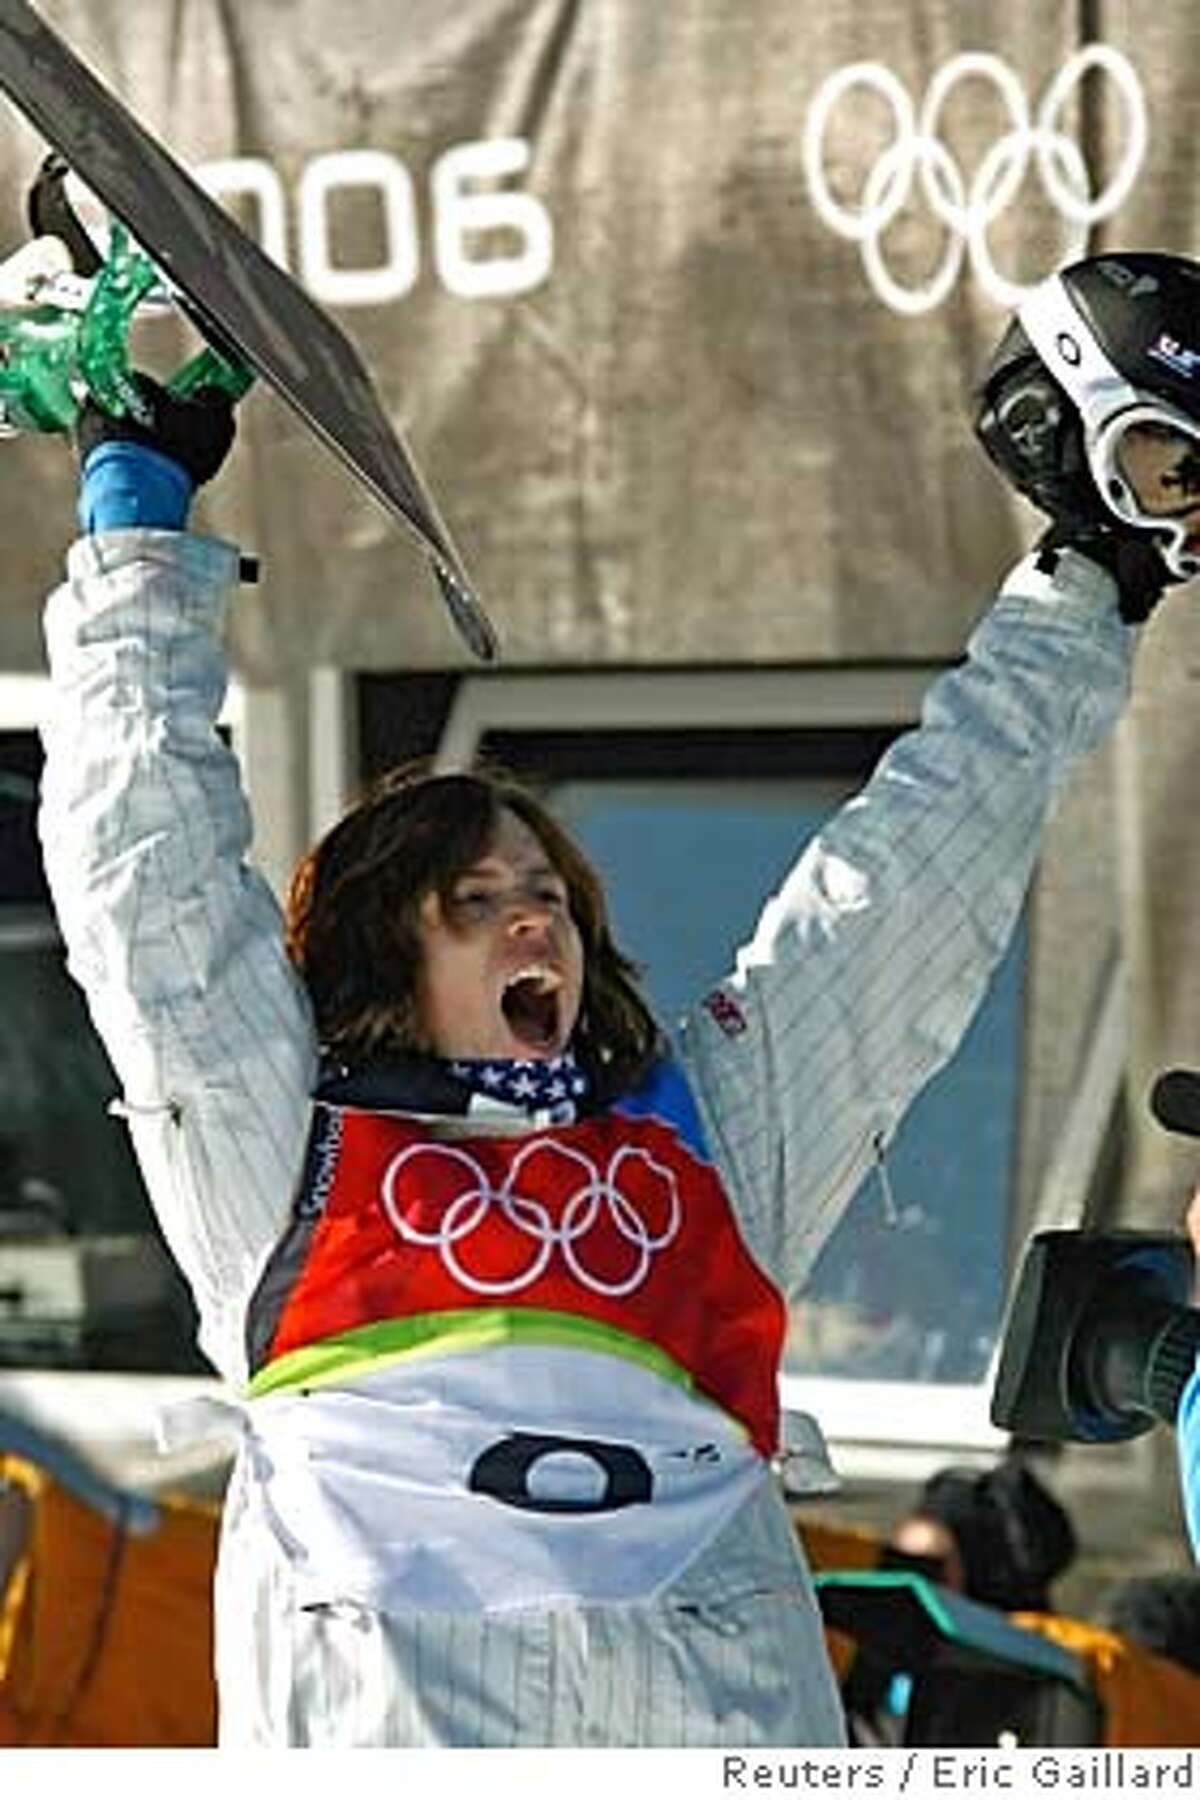 Shaun White of the U.S. celebrates during the final of the men's half pipe snowboarding competition at the Torino 2006 Winter Olympic Games in Bardonecchia, Italy February 12, 2006. REUTERS/Eric Gaillard 0